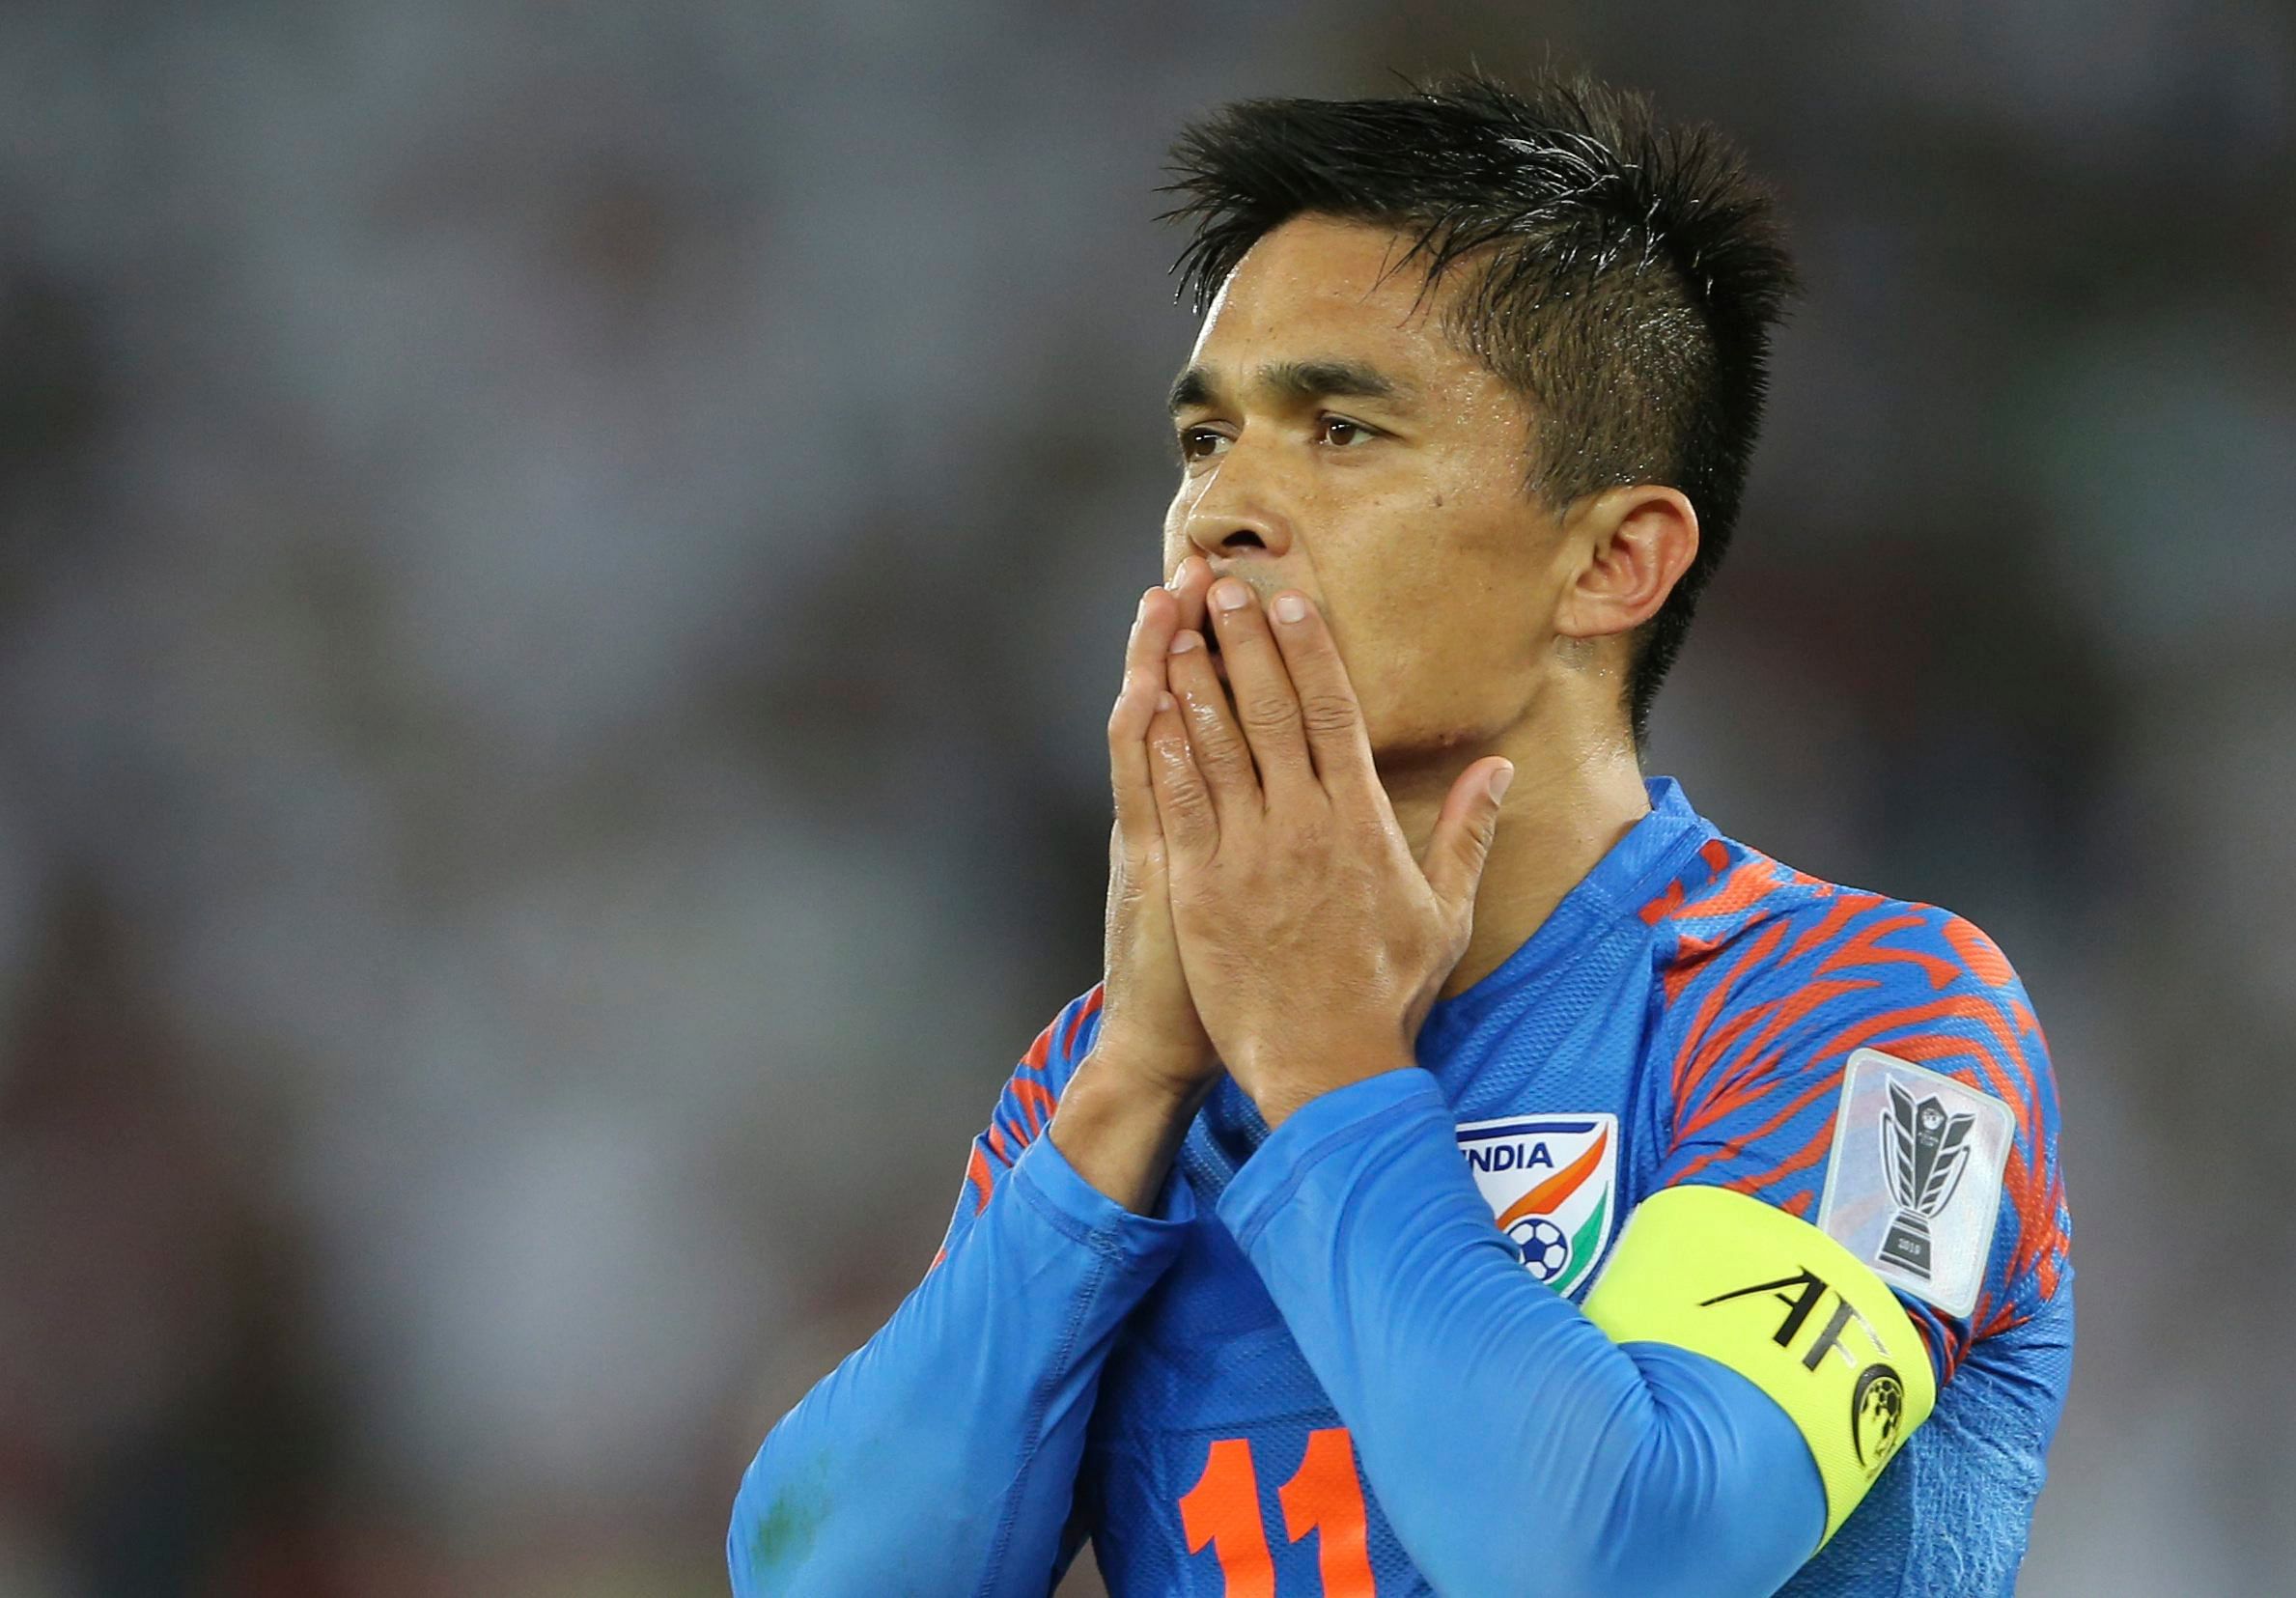  Sunil Chhetri will equal Bhaichung Bhutia's record of highest appearances for the country (107) when India takes on Bahrain on Monday. AP/ PTI  